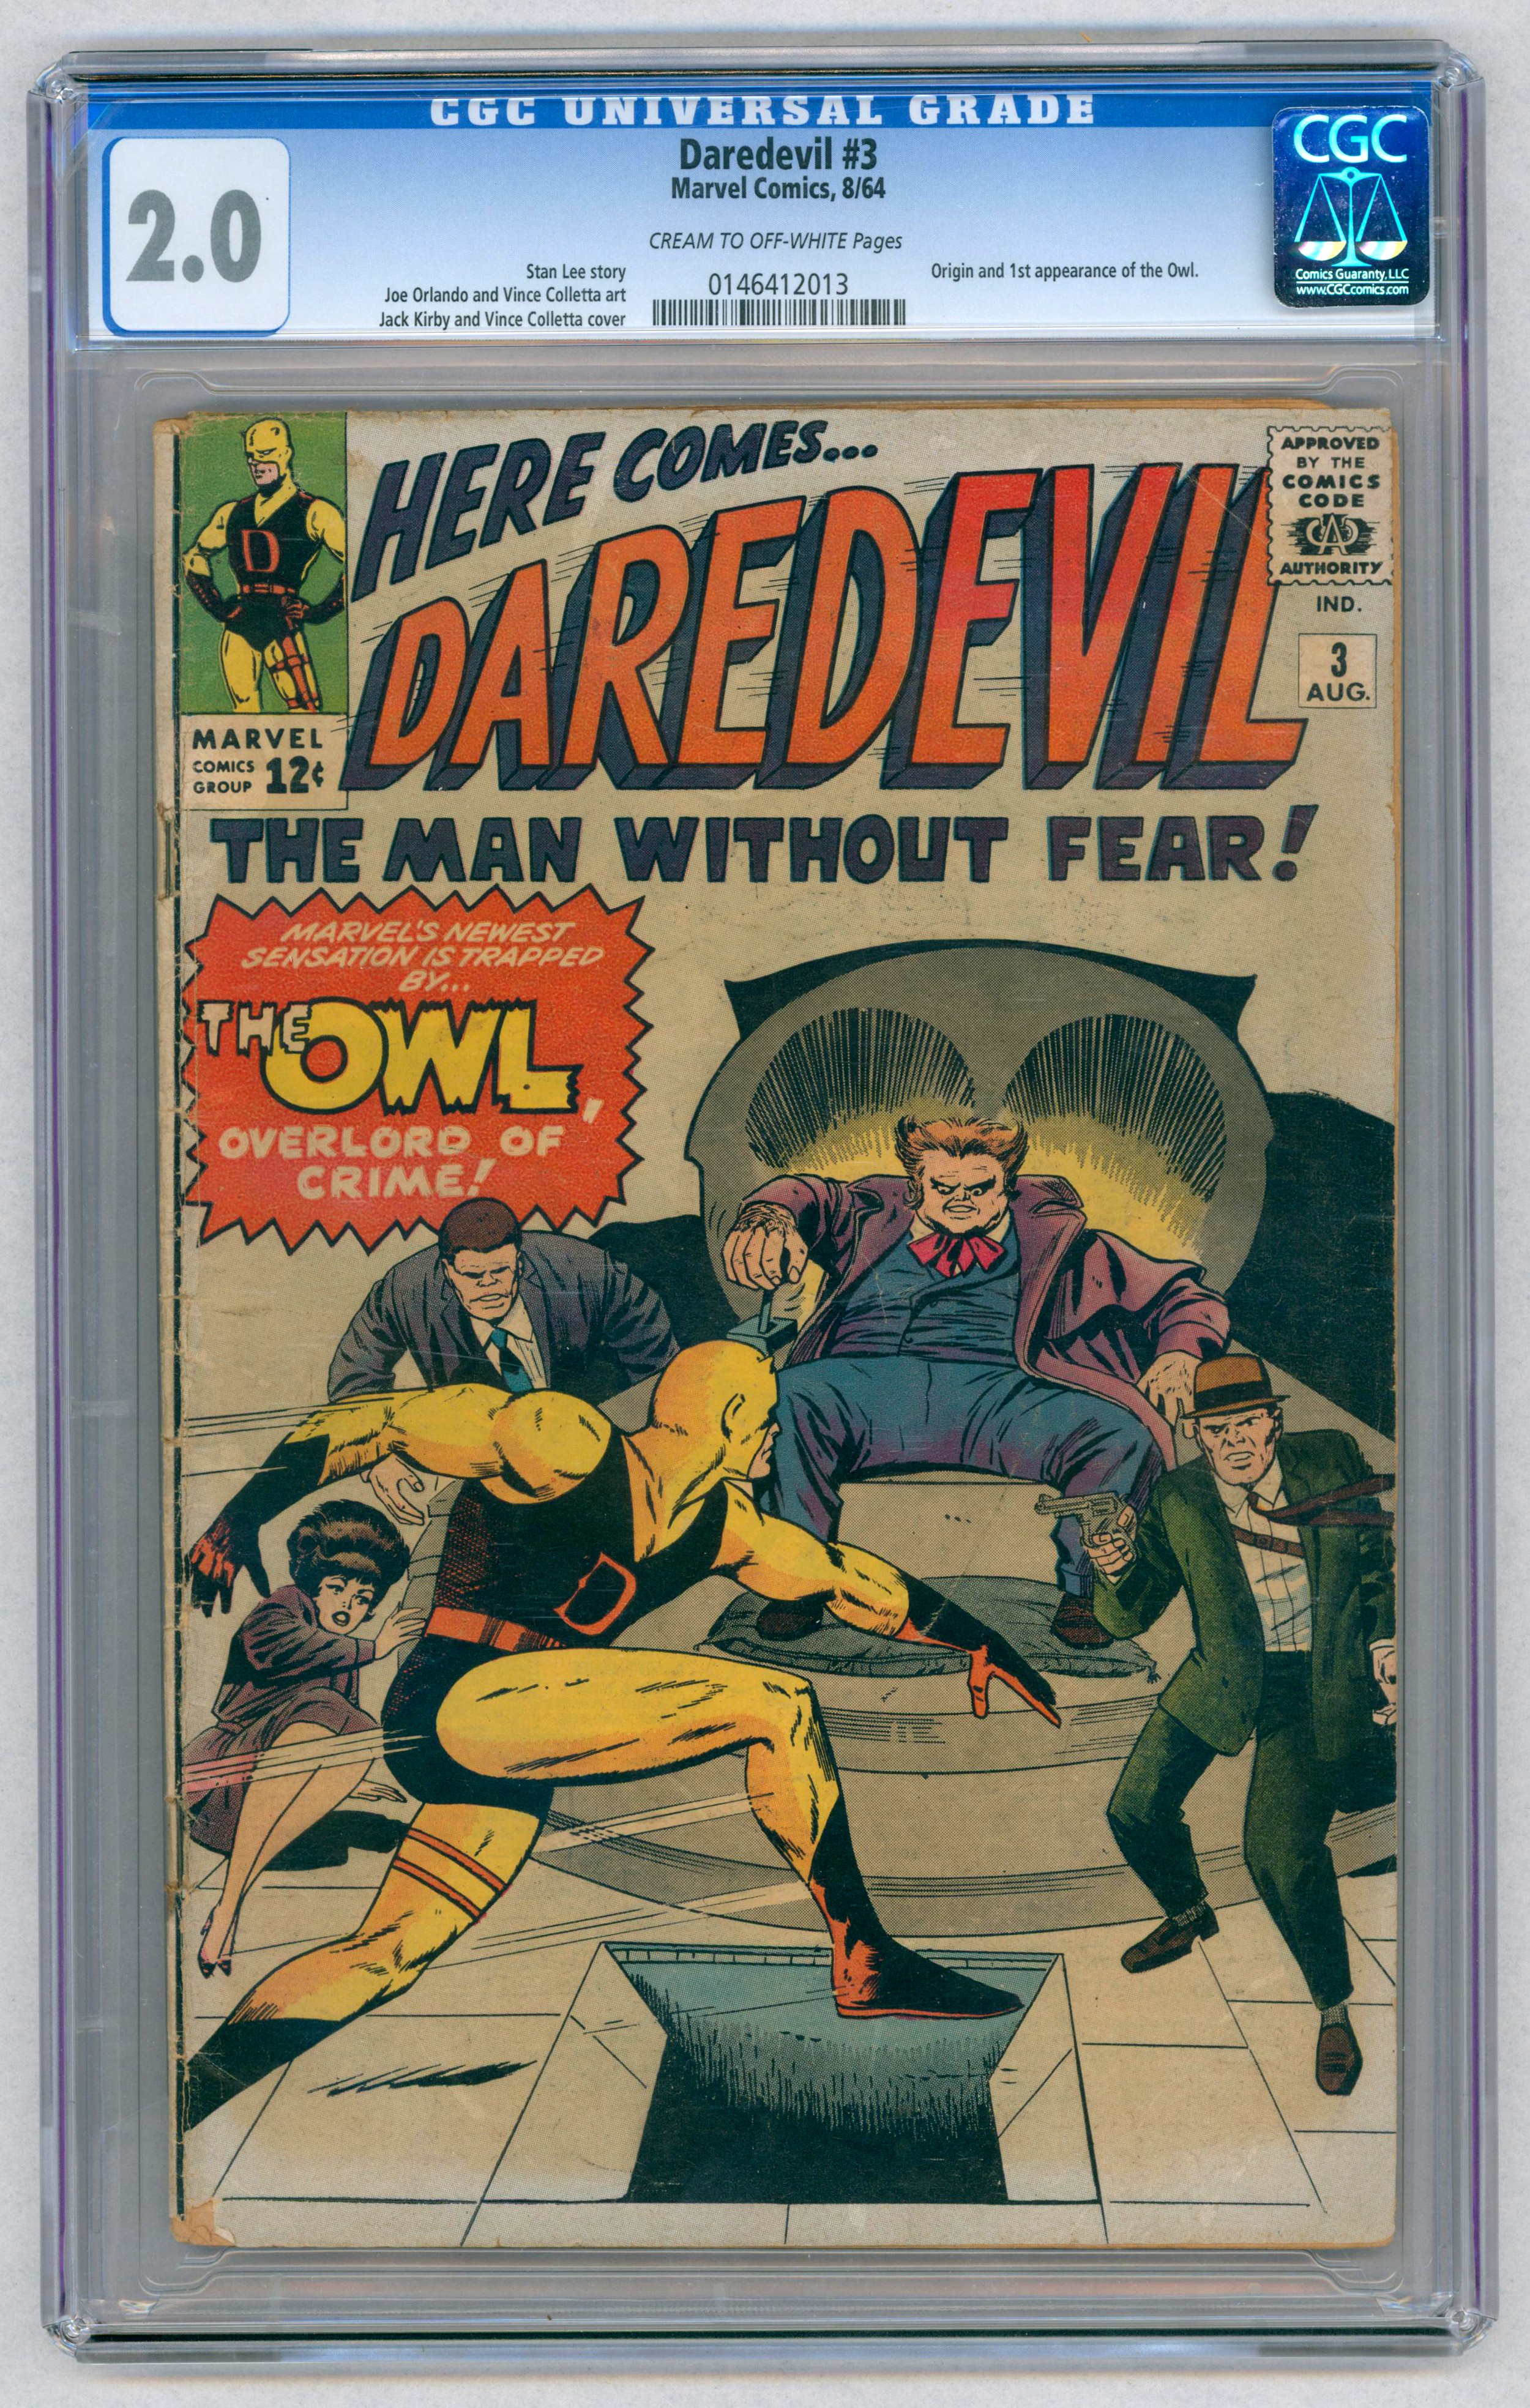 DAREDEVIL #3 – (Aug. 1964 Marvel Comics) – GRADED 2.0 by CGC – Origin & first appearance of the Owl.